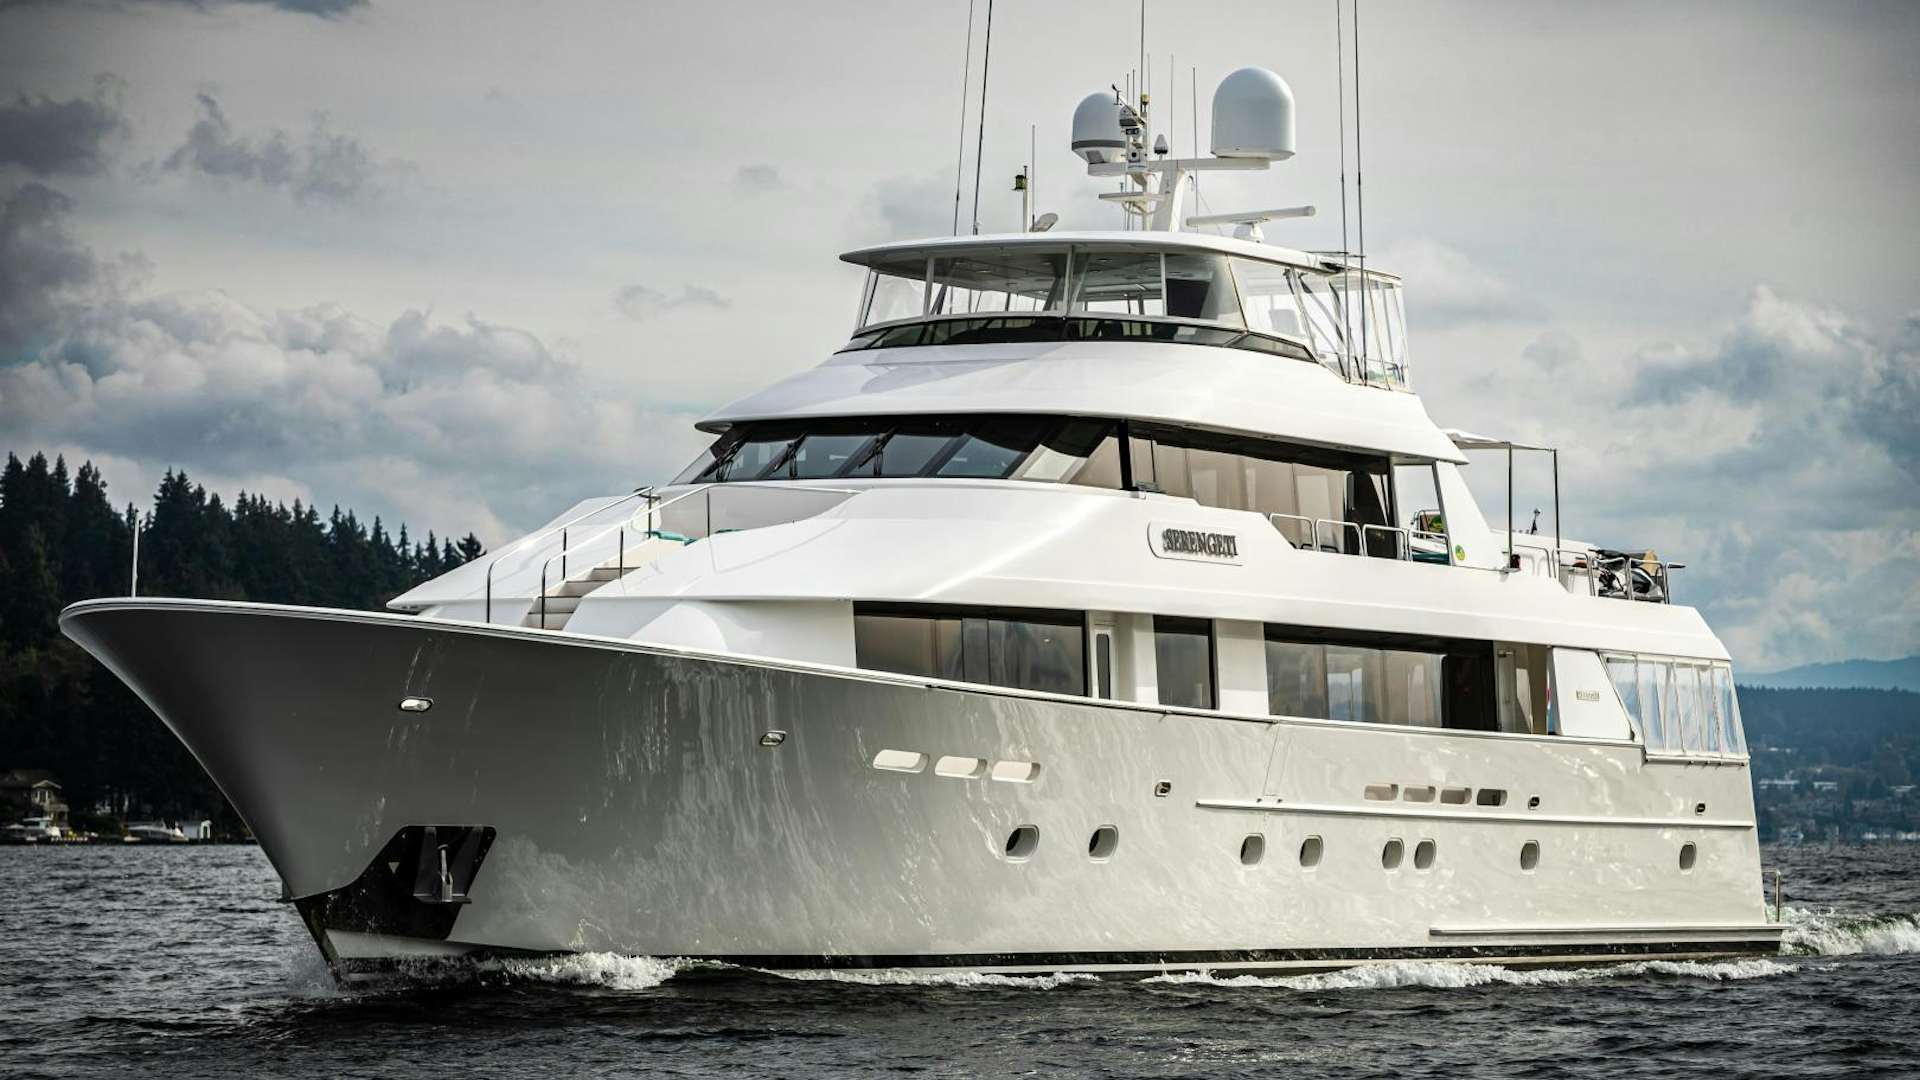 Watch Video for SERENGETI Yacht for Sale